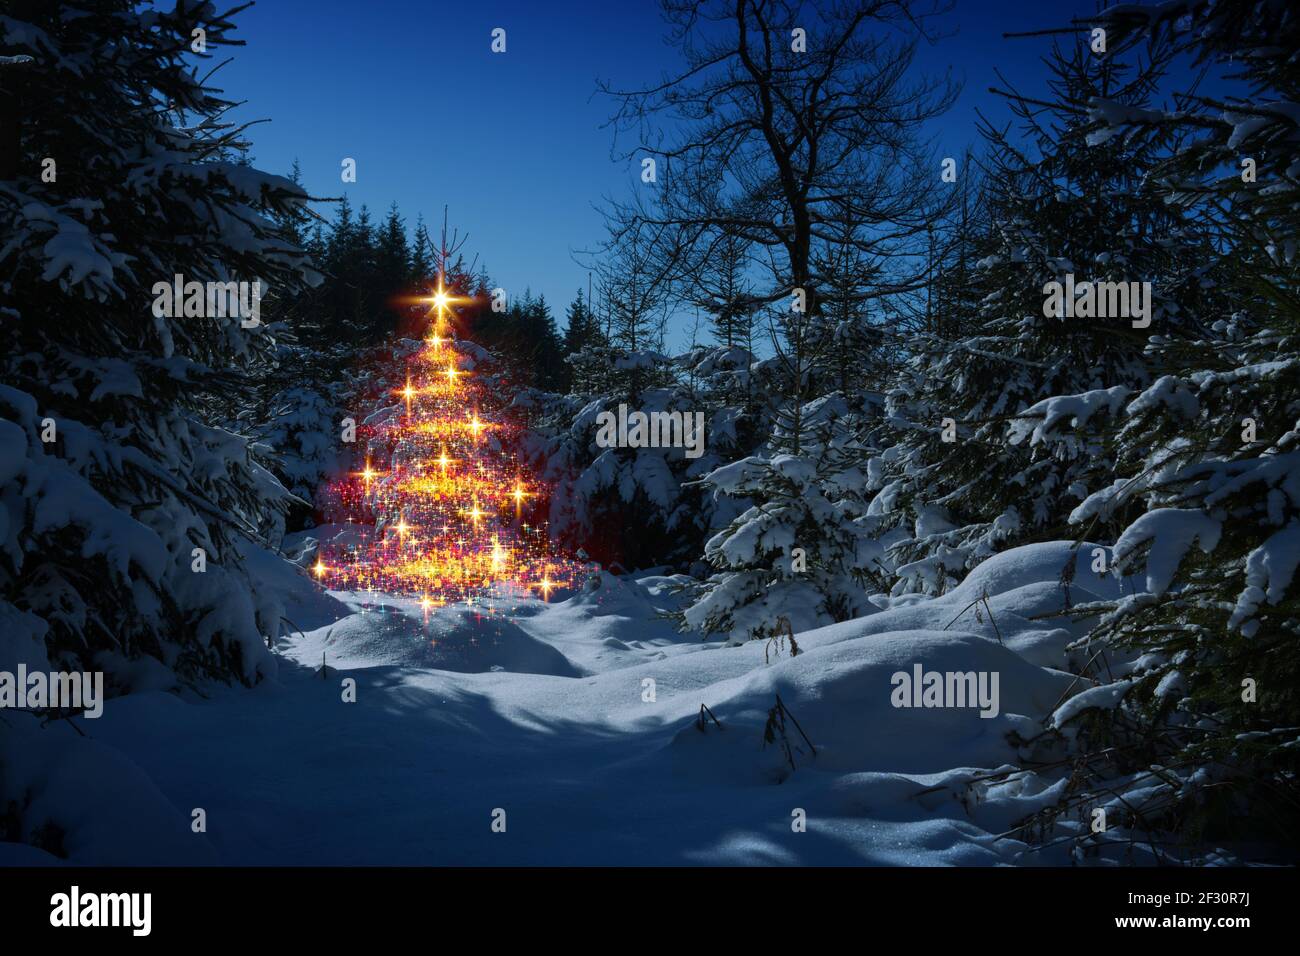 Christmas tree in winter forest wih snow. Christmas Card. Stock Photo